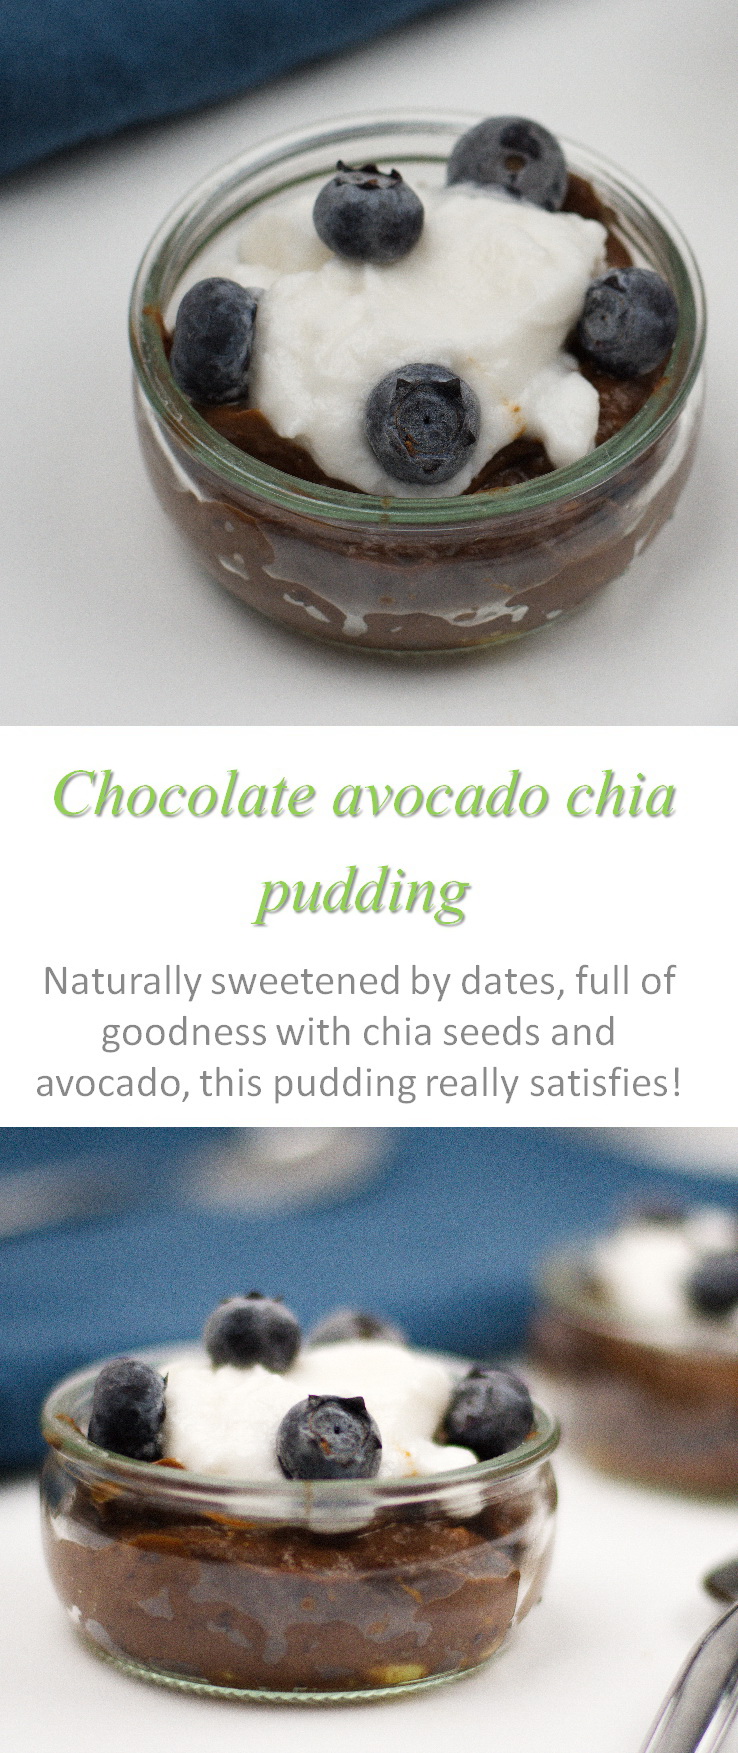 A rich, chocolate pudding, full of goodness from avocados, dates and chia seeds - this chocolate avocado chia pudding is the perfect Paleo-friendly breakfast!